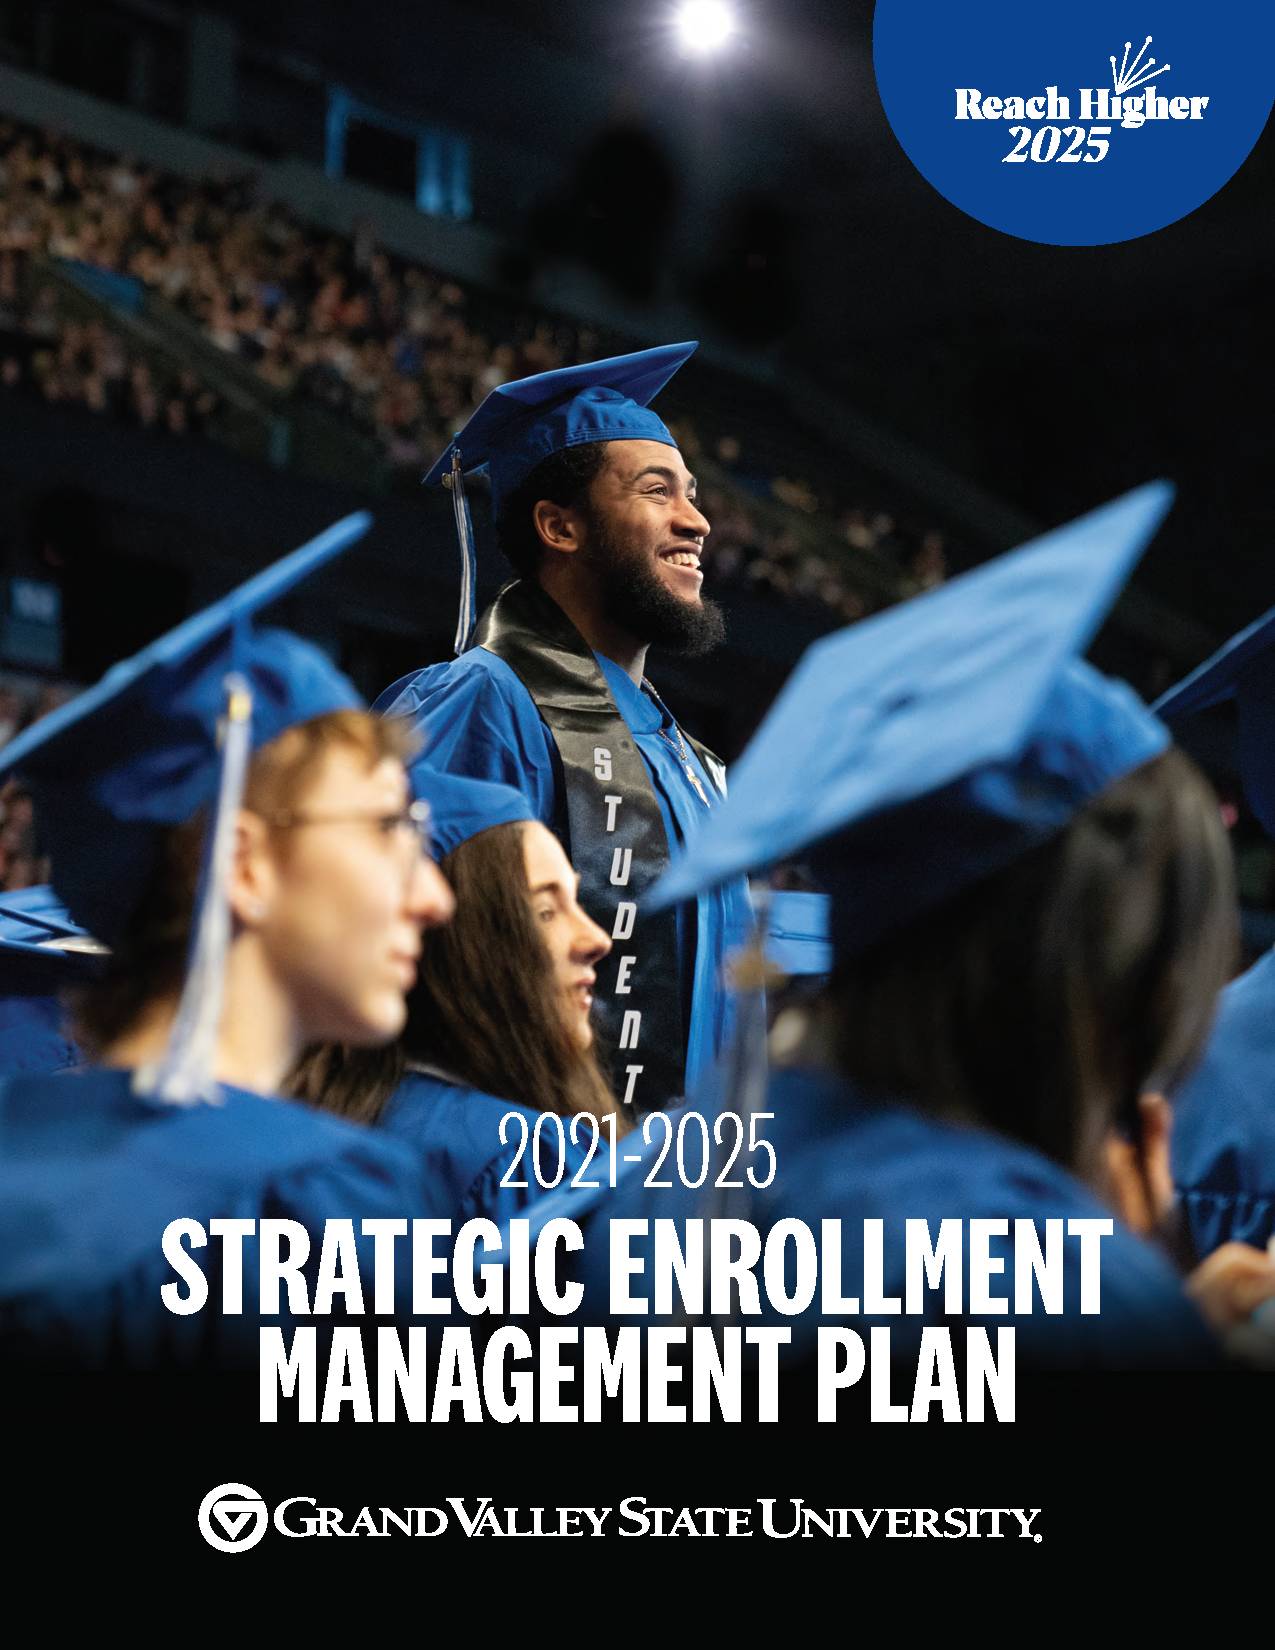 Student in cap and gown smiling with words "2021-2025 Strategic Enrollment Management Plan"